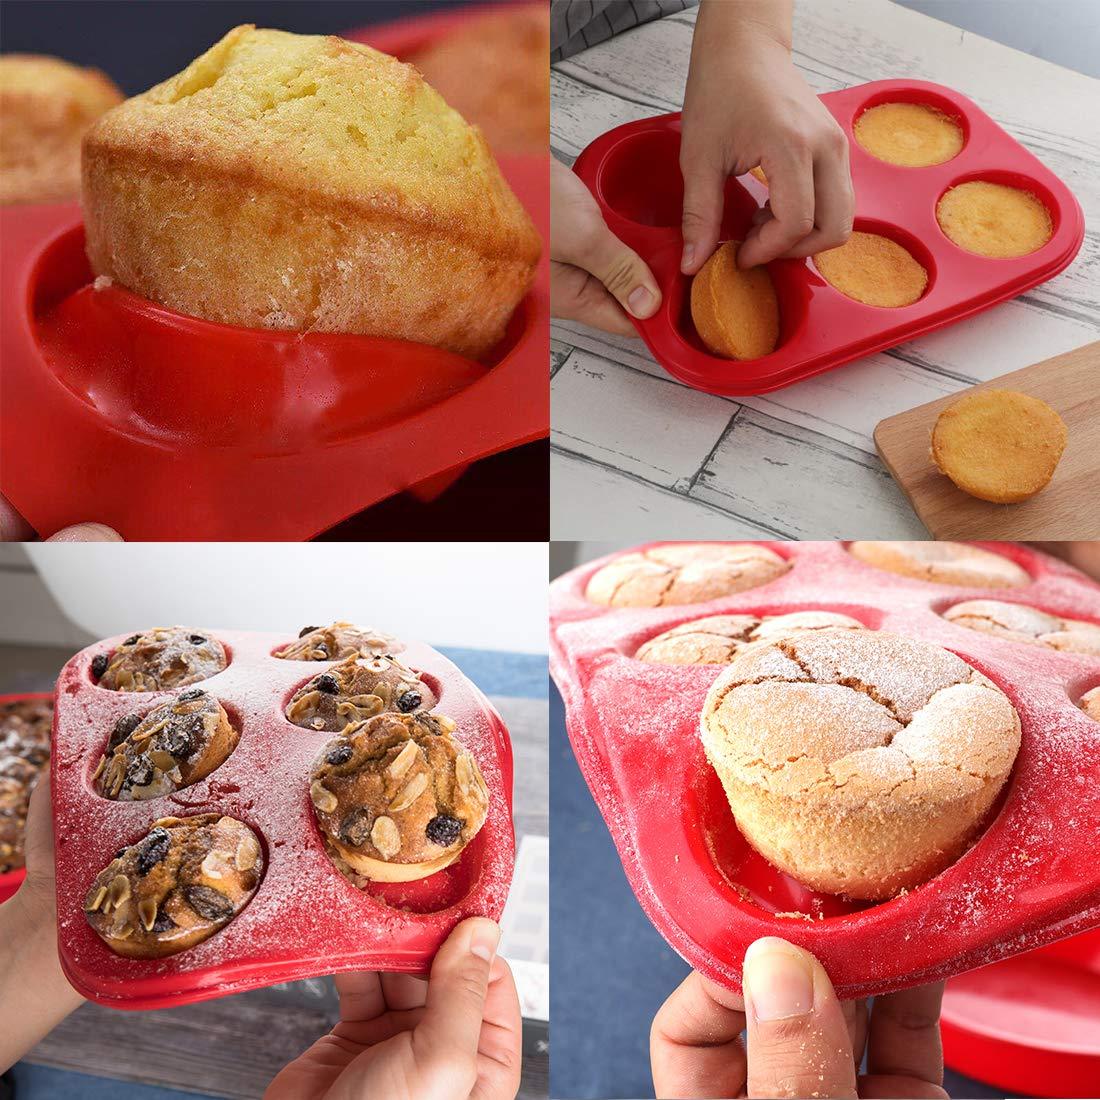 Silicone Muffin Pan, European LFGB Silicone Cupcake Baking Pan, 6 Cup Muffin, Non-Stick Muffin Tray, Egg Muffin Pan, Food Grade Muffin Molds, BPA Free Muffin Tins Red - CookCave